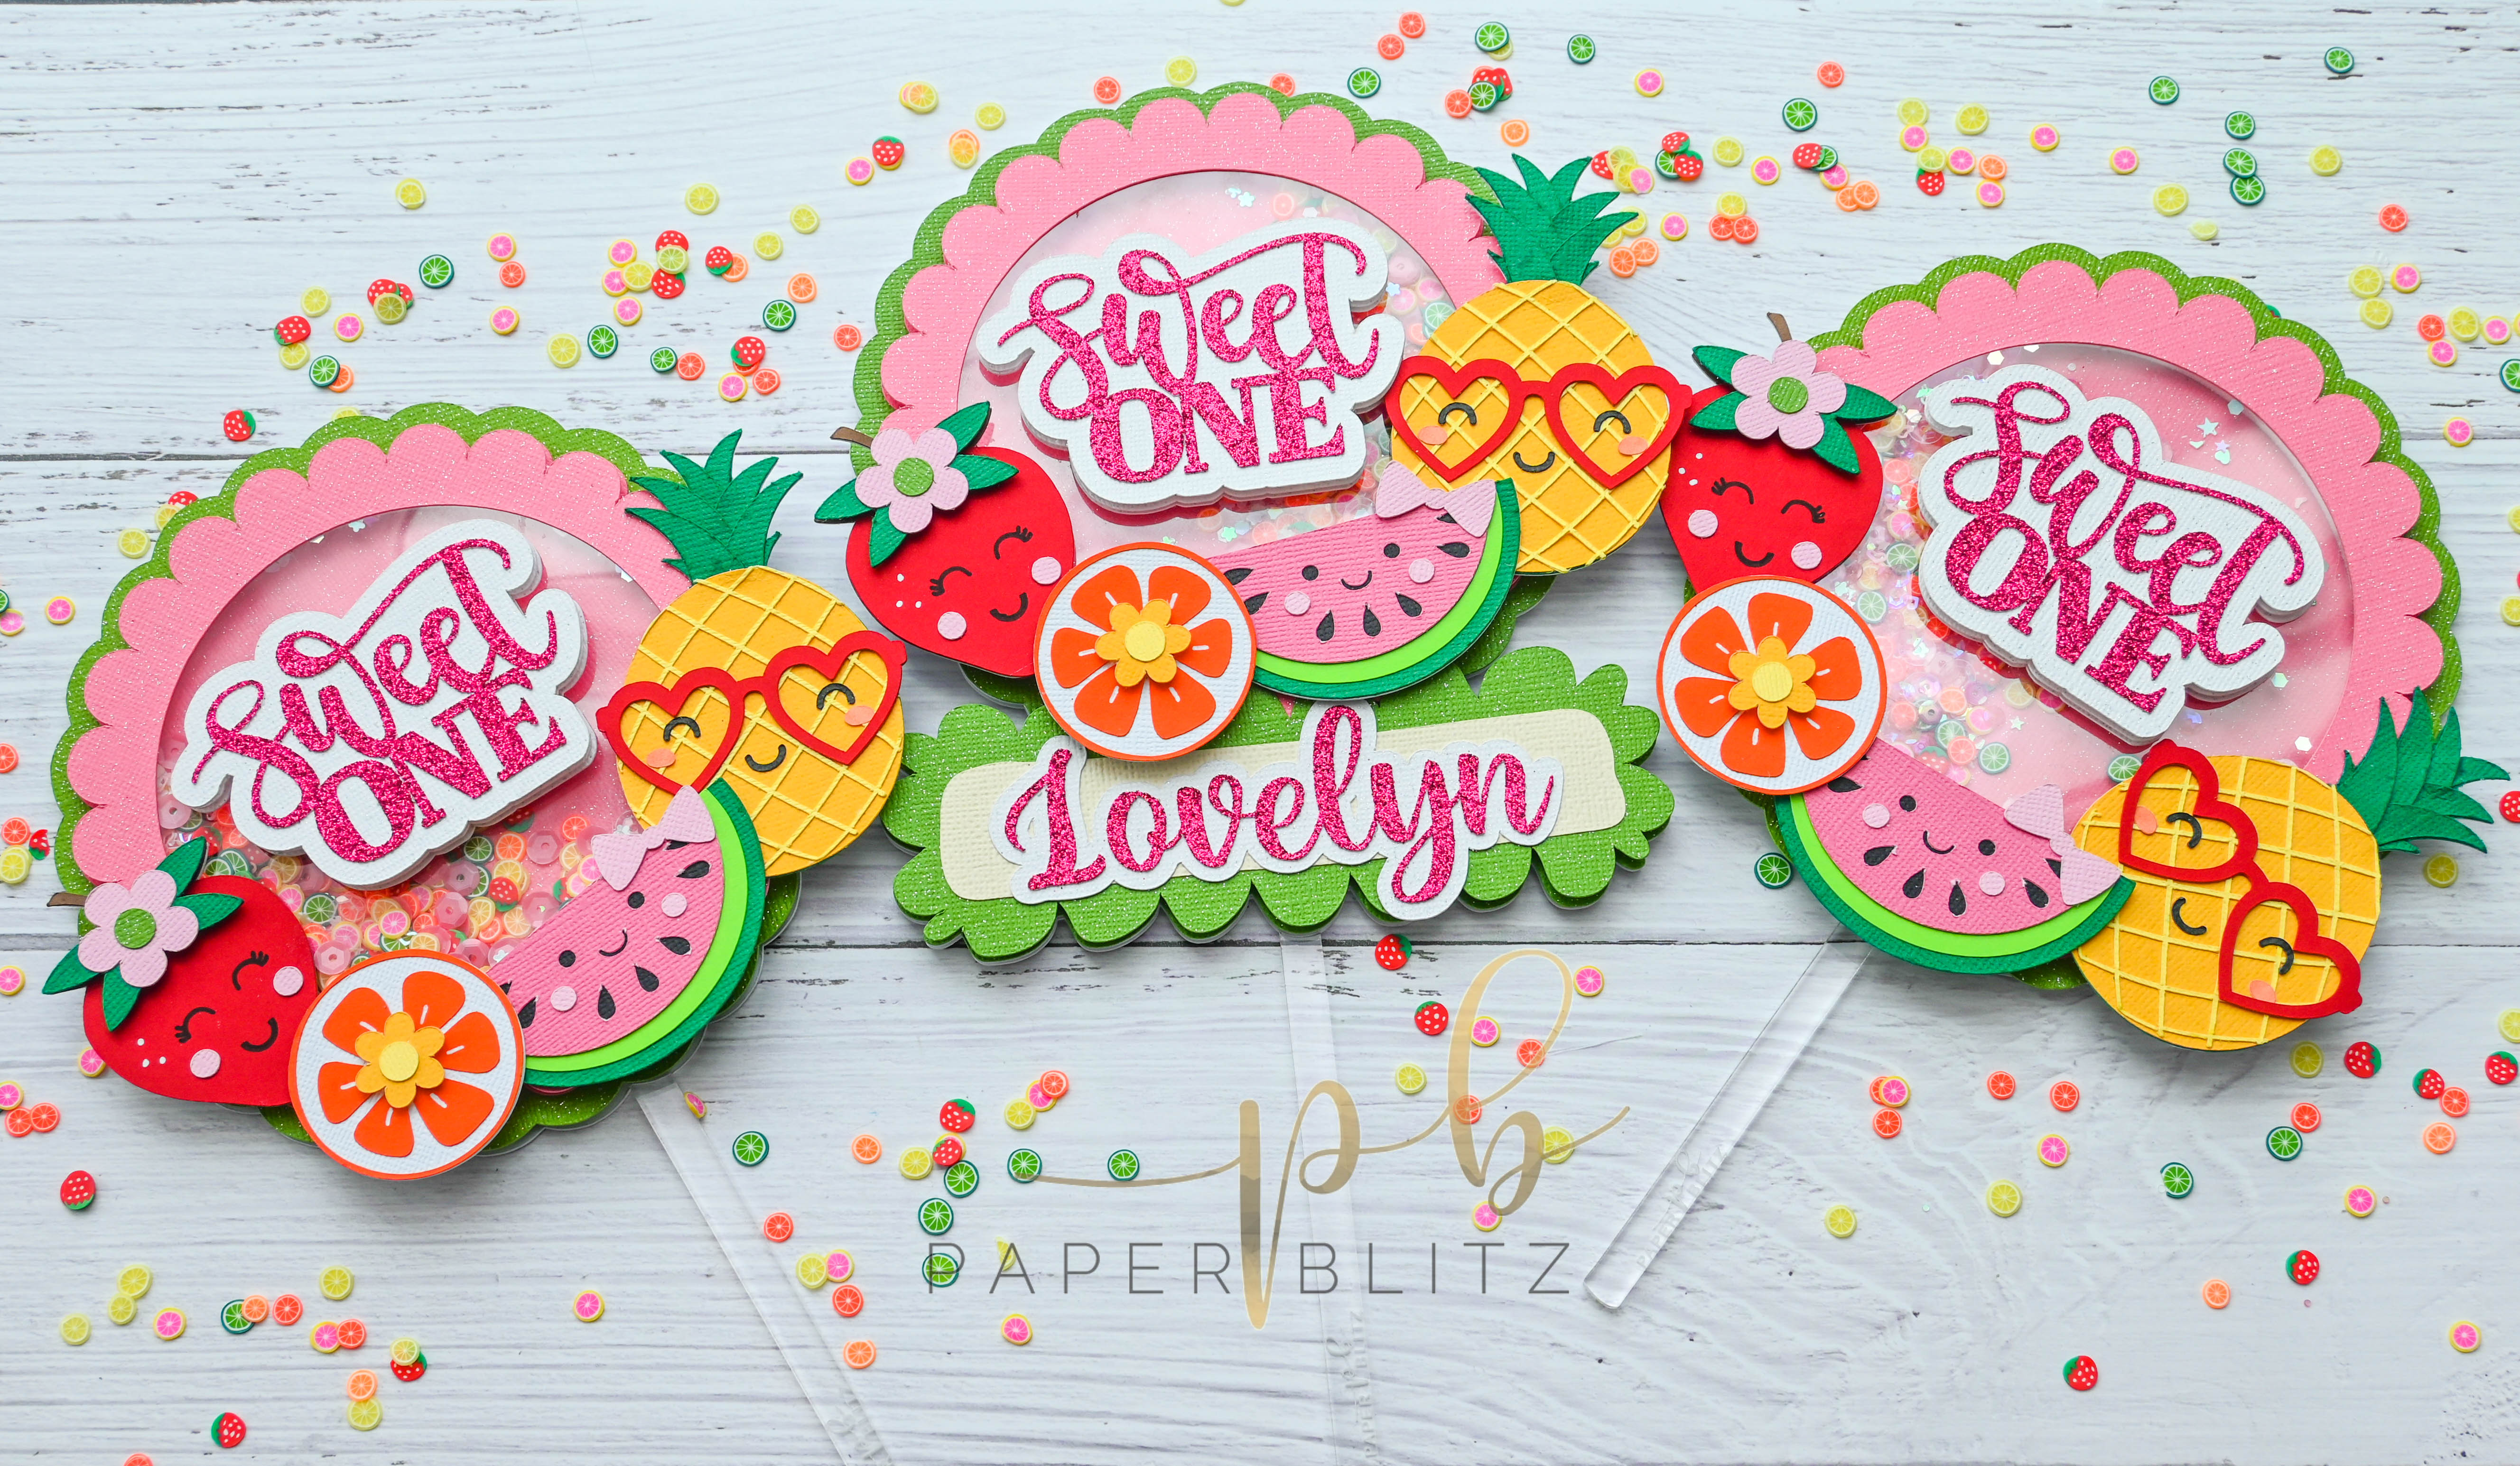 cake toppers that say 'sweet one'